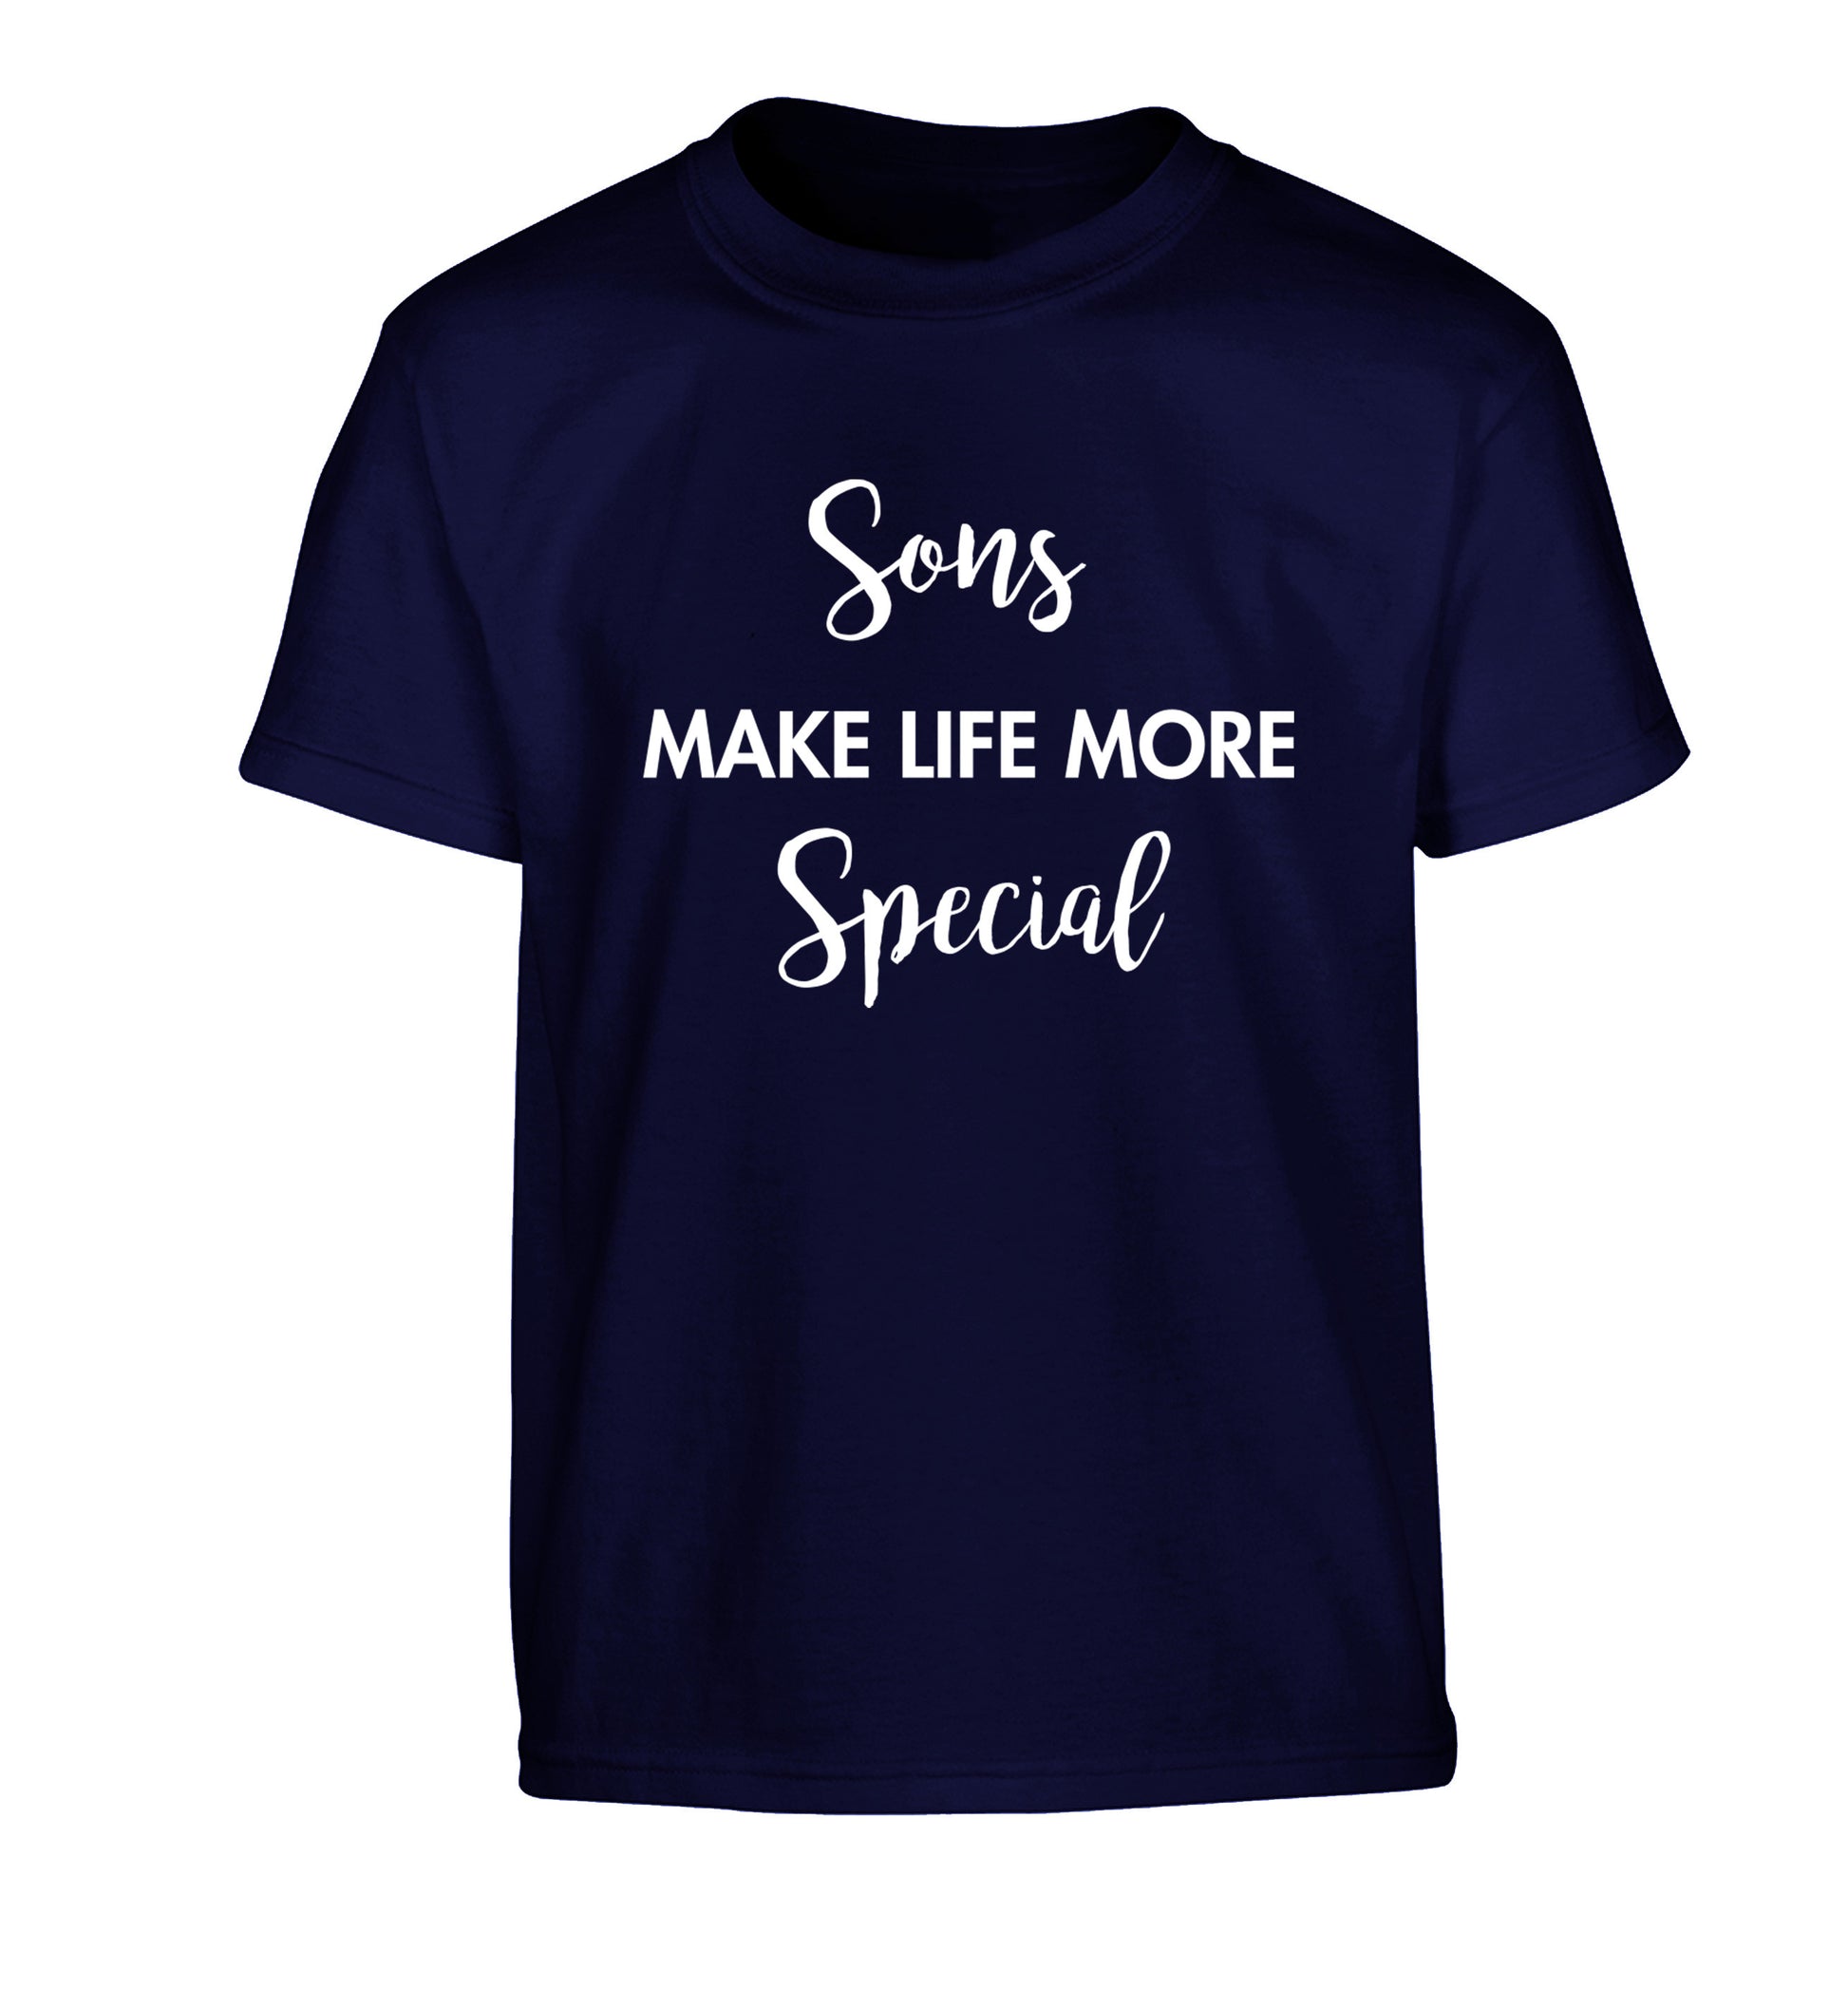 Sons make life more special Children's navy Tshirt 12-14 Years